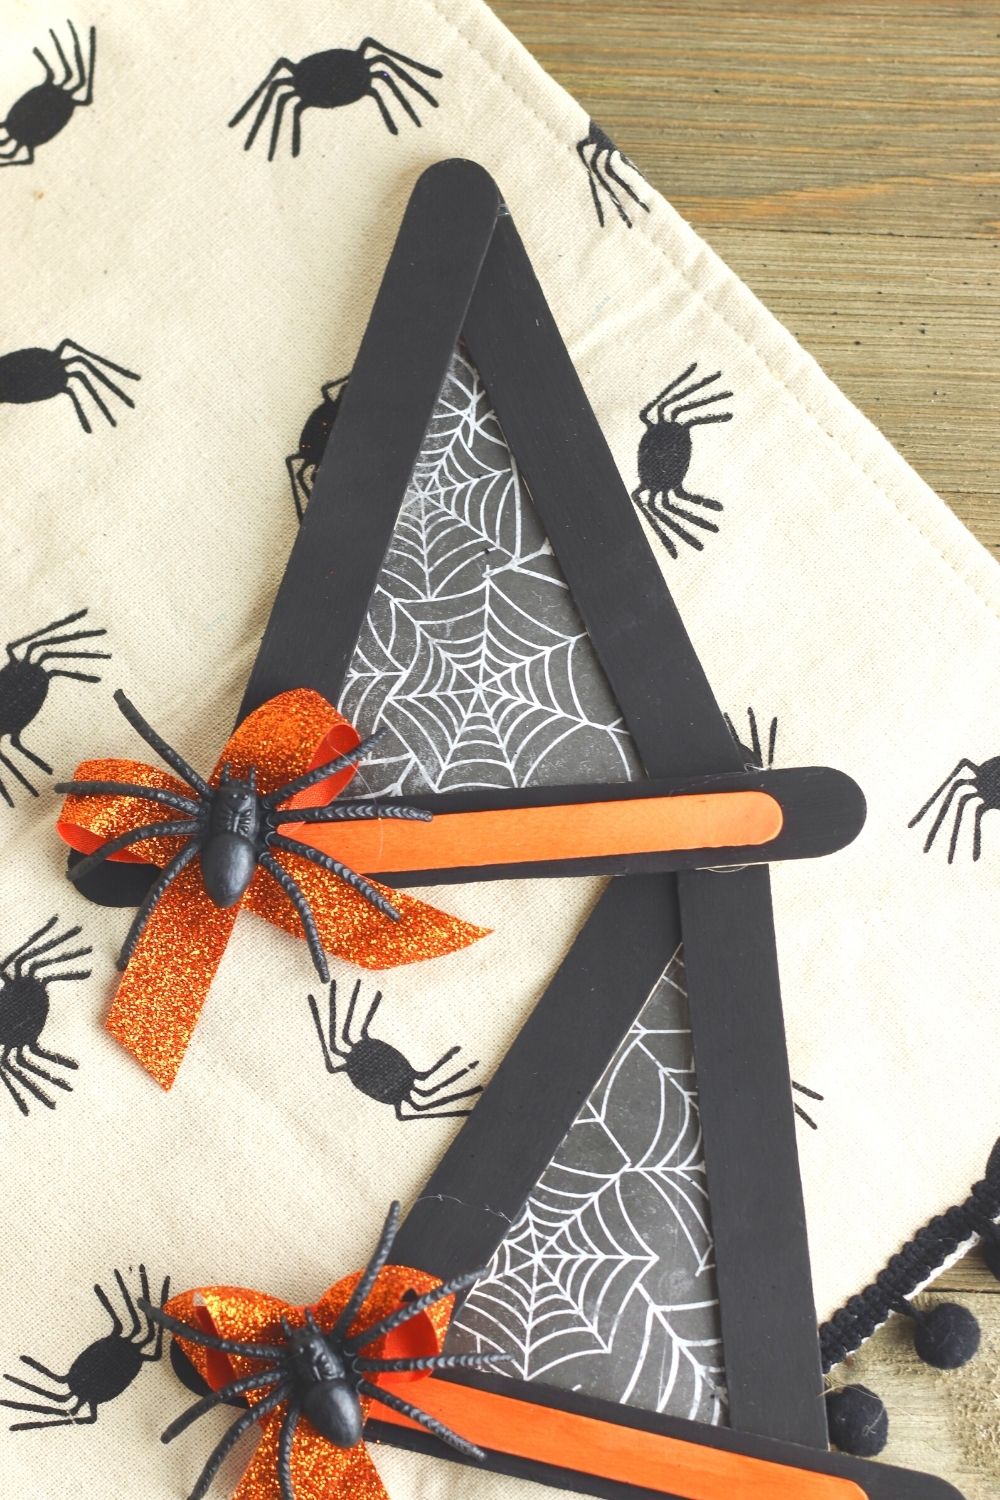 When you want to get into the Halloween spirit, this Witch Hat Craft is a must. You can create the perfect miniature witch hats with simple crafting supplies and then use these handmade items as decorations for your home, office, or classroom. This easy Halloween craft is perfect for young children too.